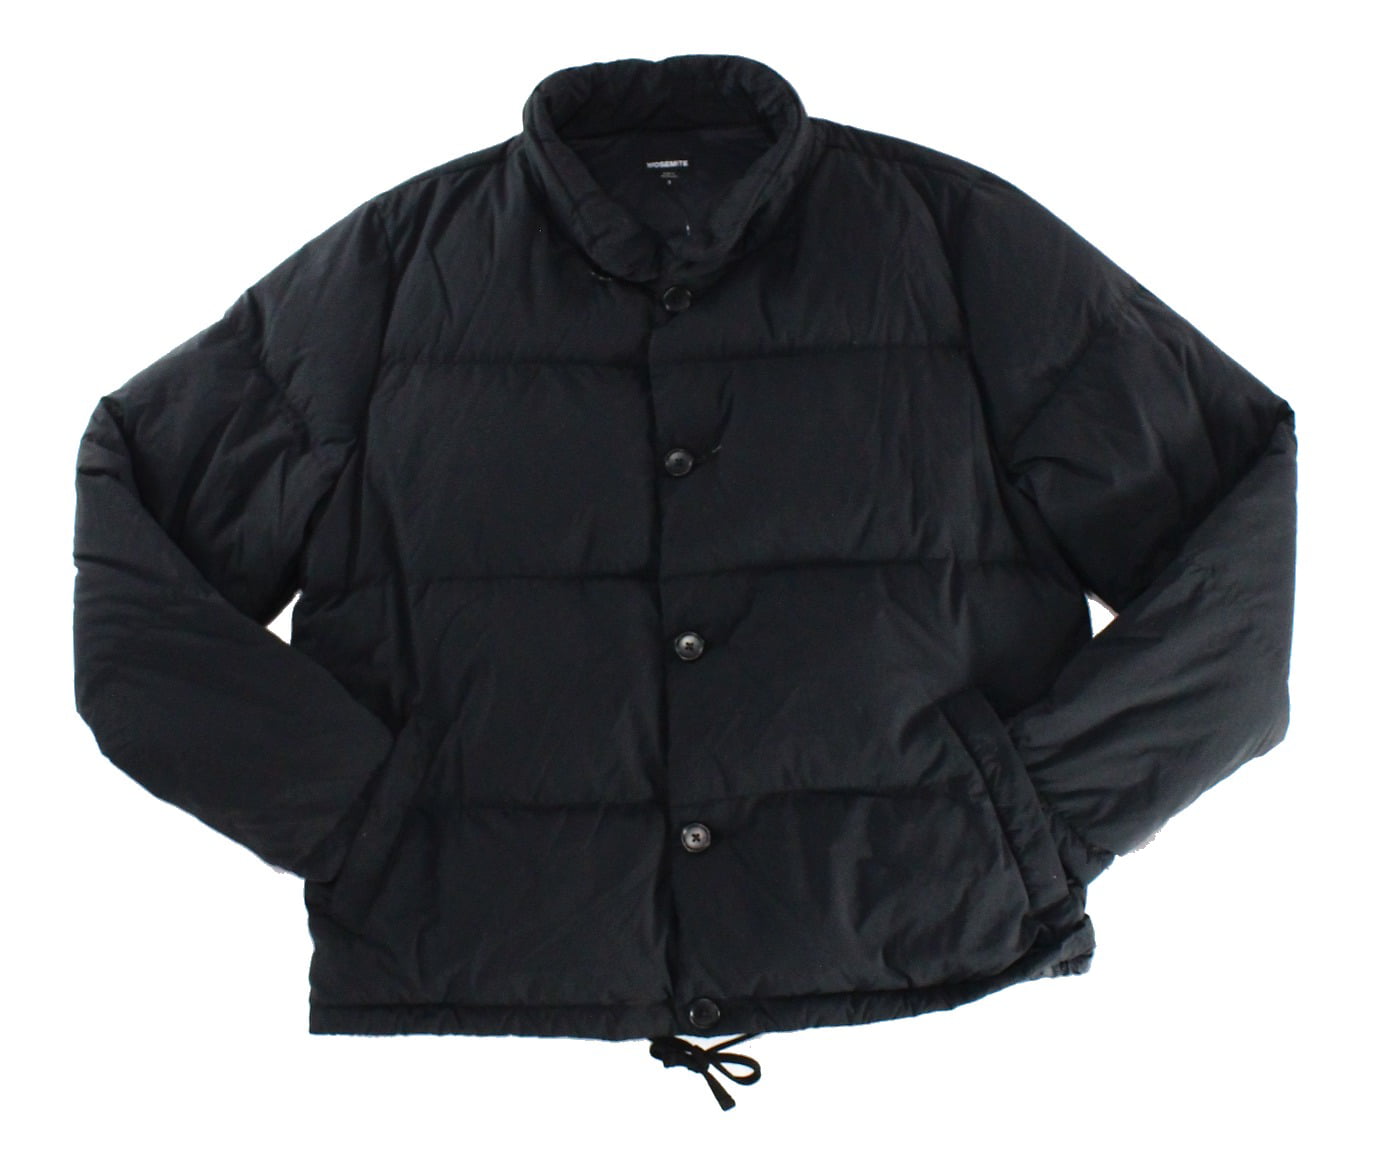 James Perse - James Perse Yosemite NEW Black Mens Size Large L Puffer ...